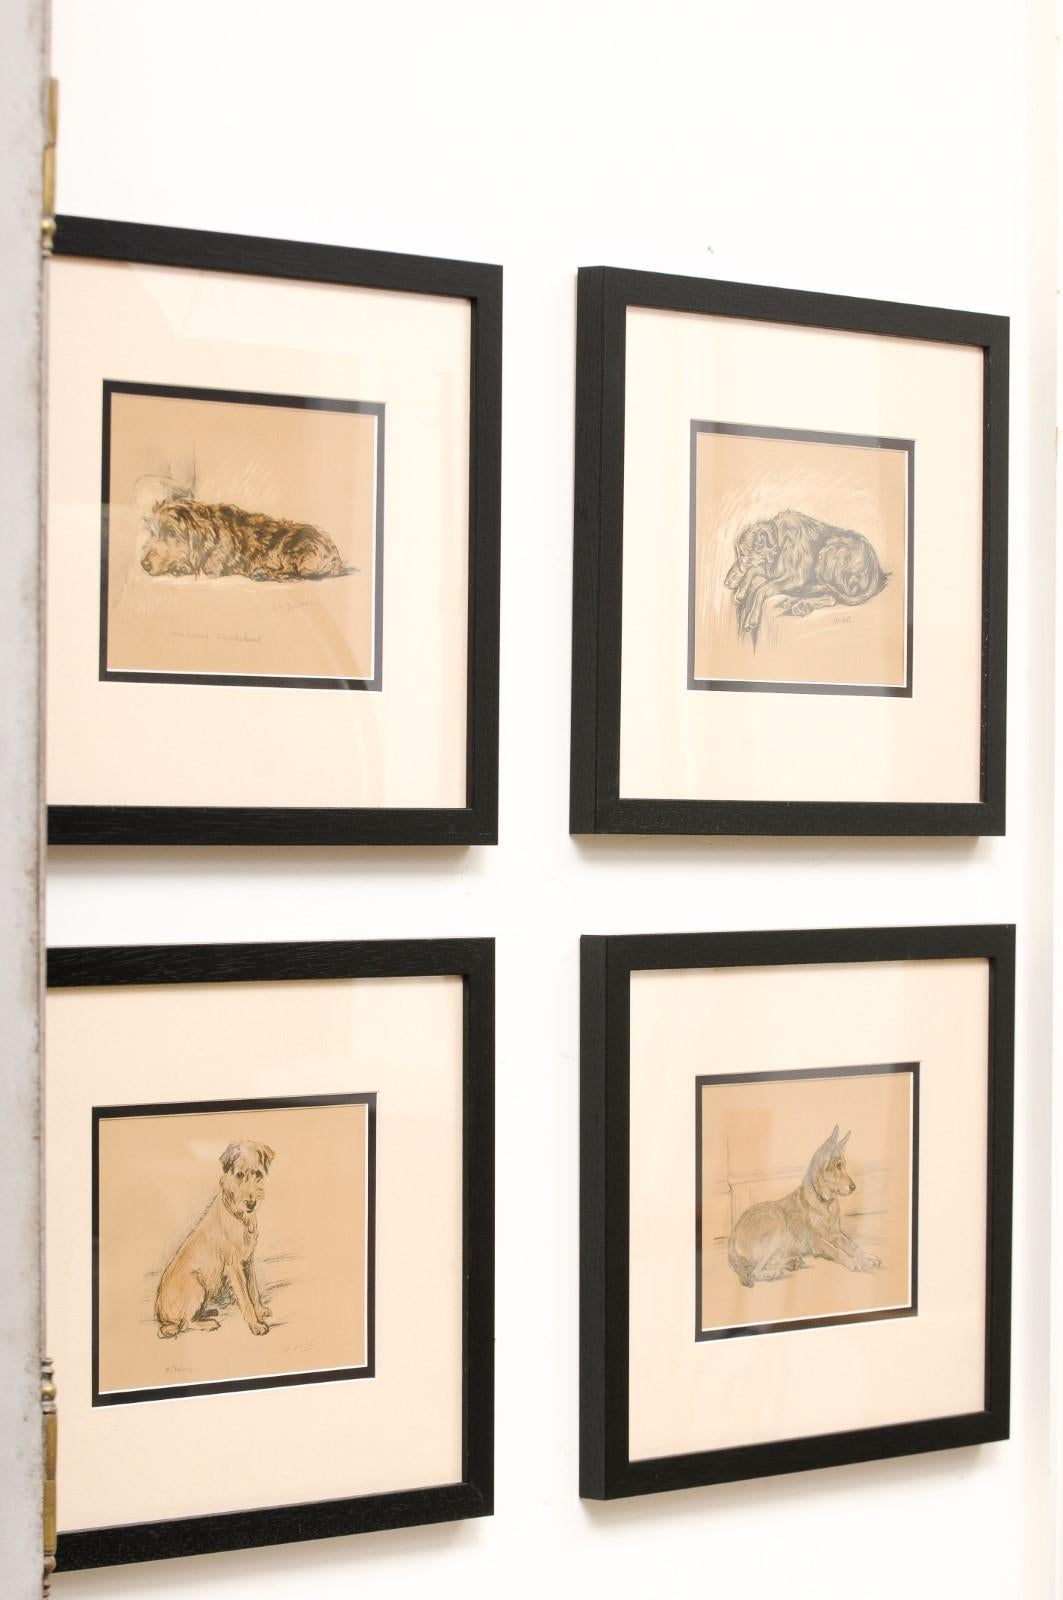 Set of 8 English Lucy Dawson Prints Depicting Dogs in Black Frames under Glass. 7